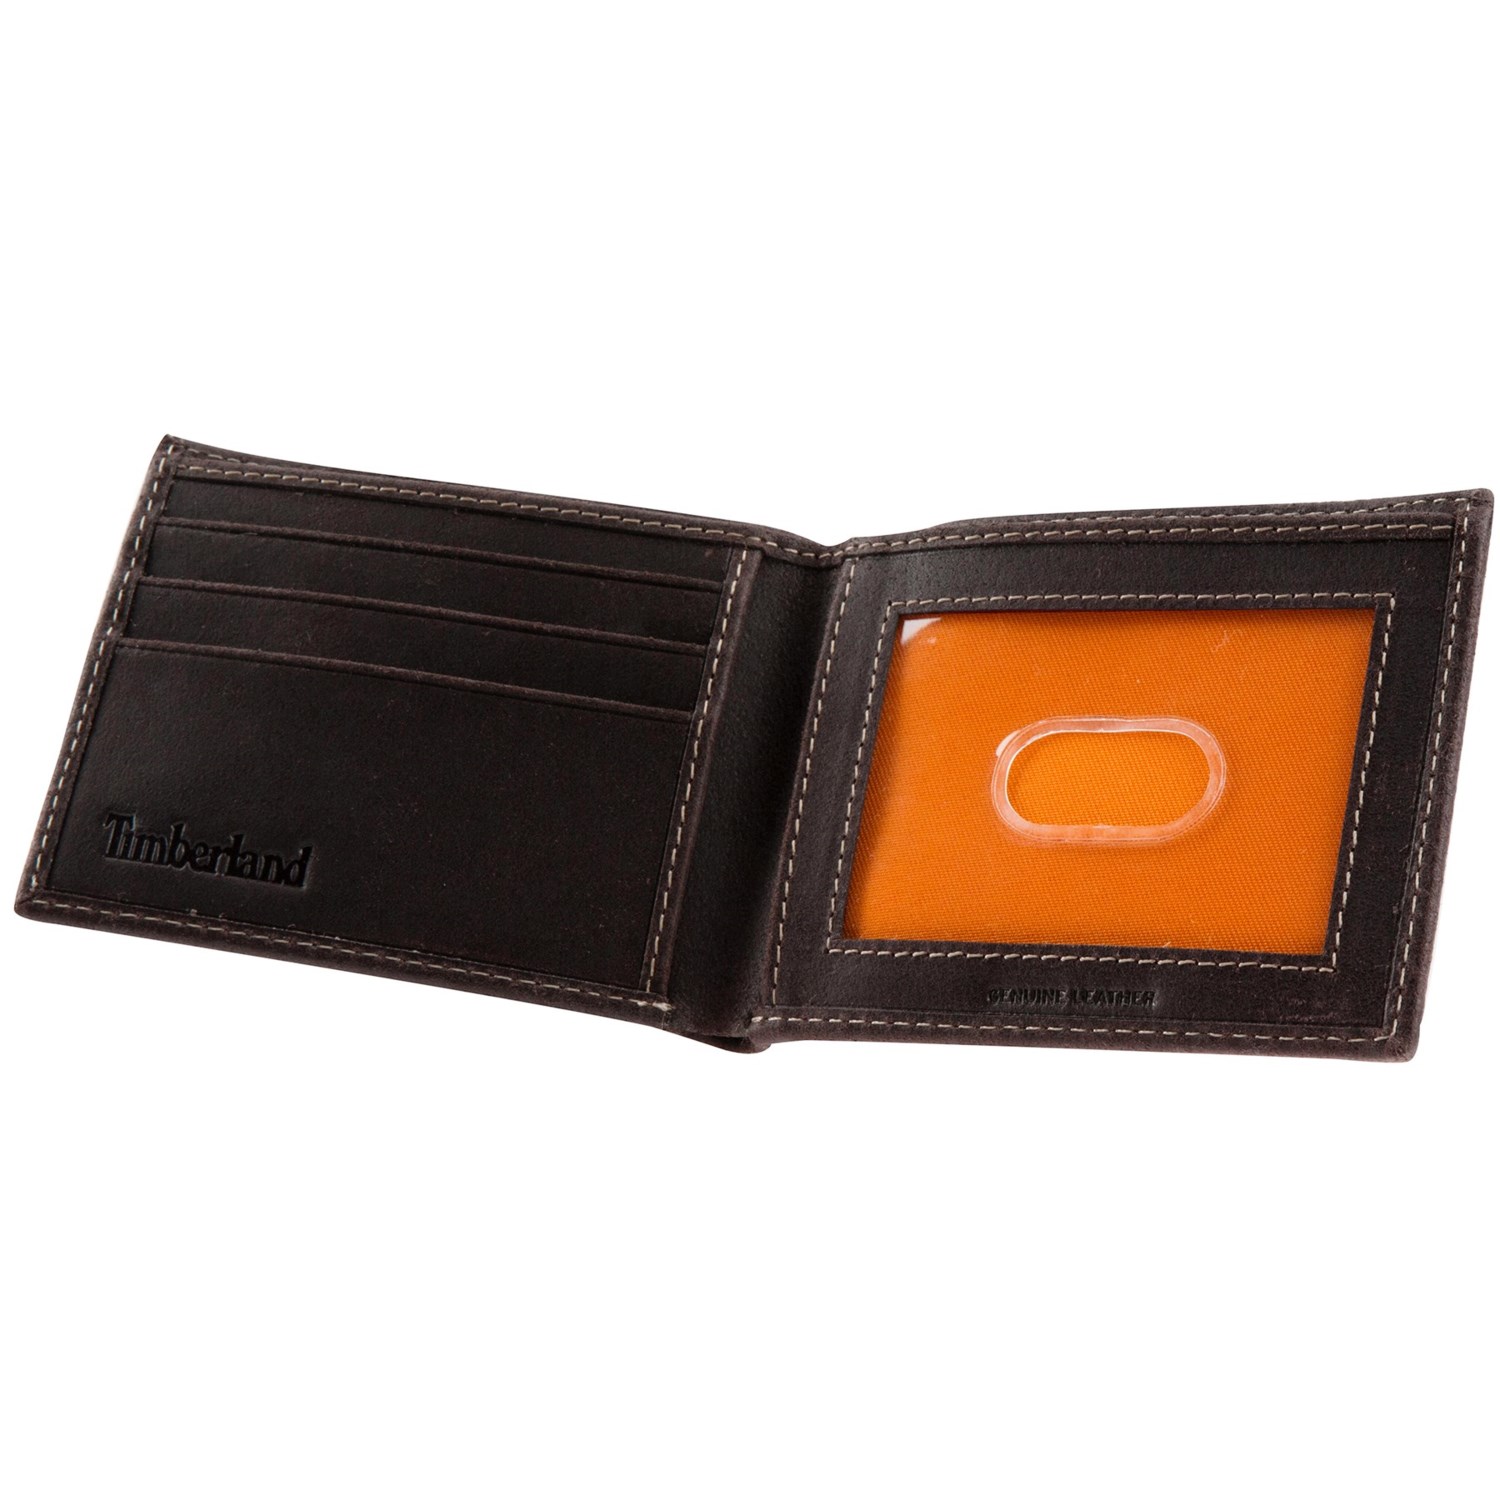 Timberland Delta Slimfold Wallet - Leather - Save 66%